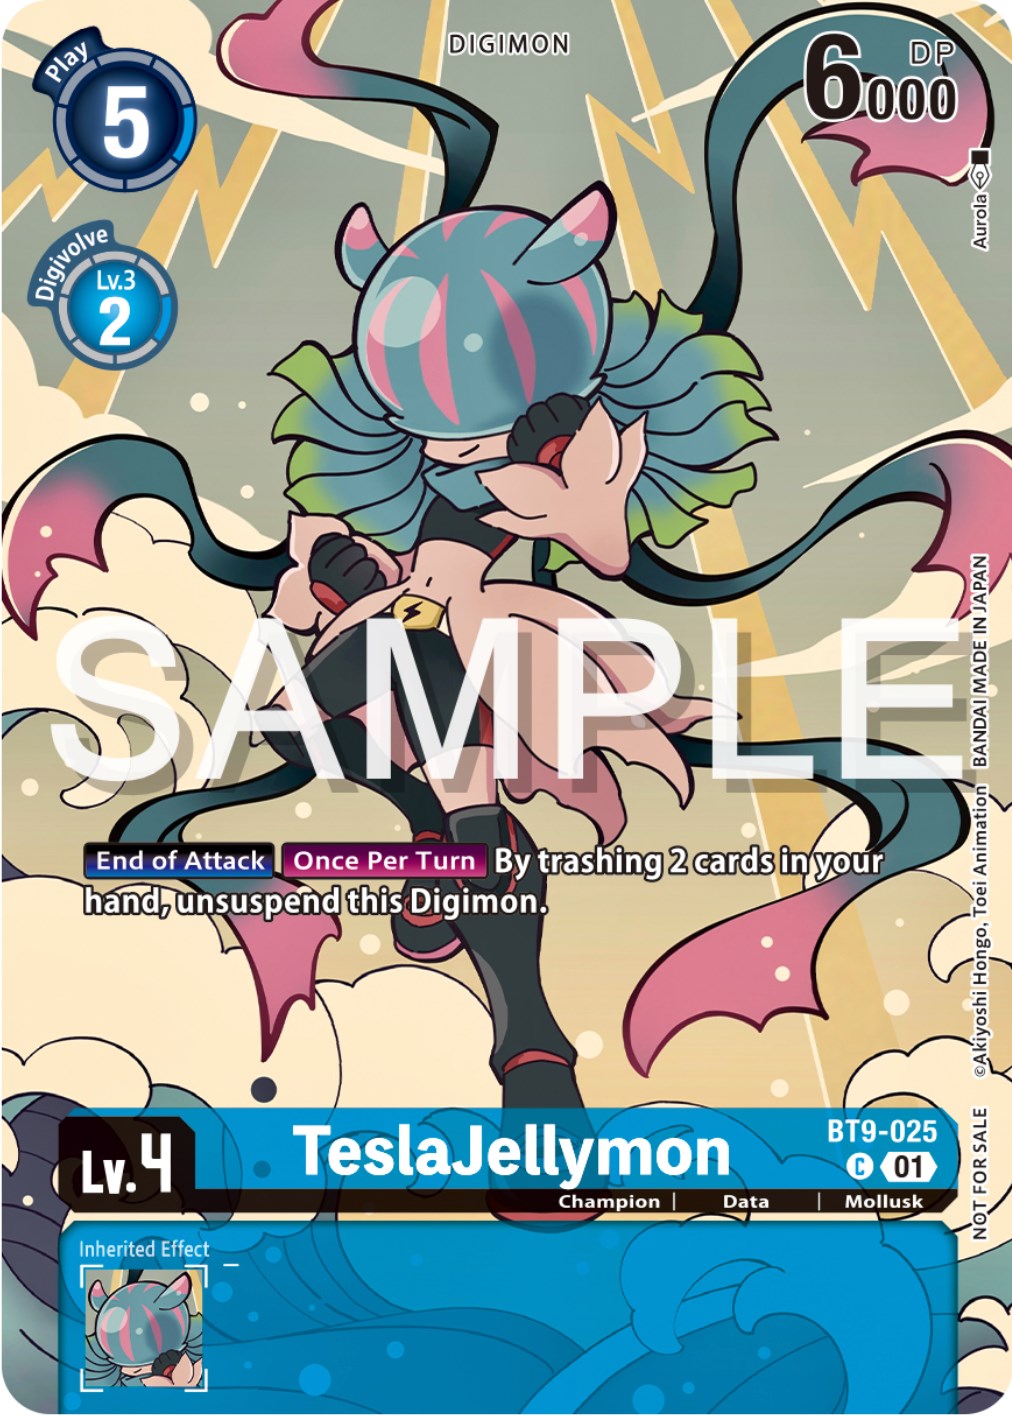 TeslaJellymon [BT9-025] (Digimon Illustration Competition Pack 2023) [X Record Promos] | Black Swamp Games